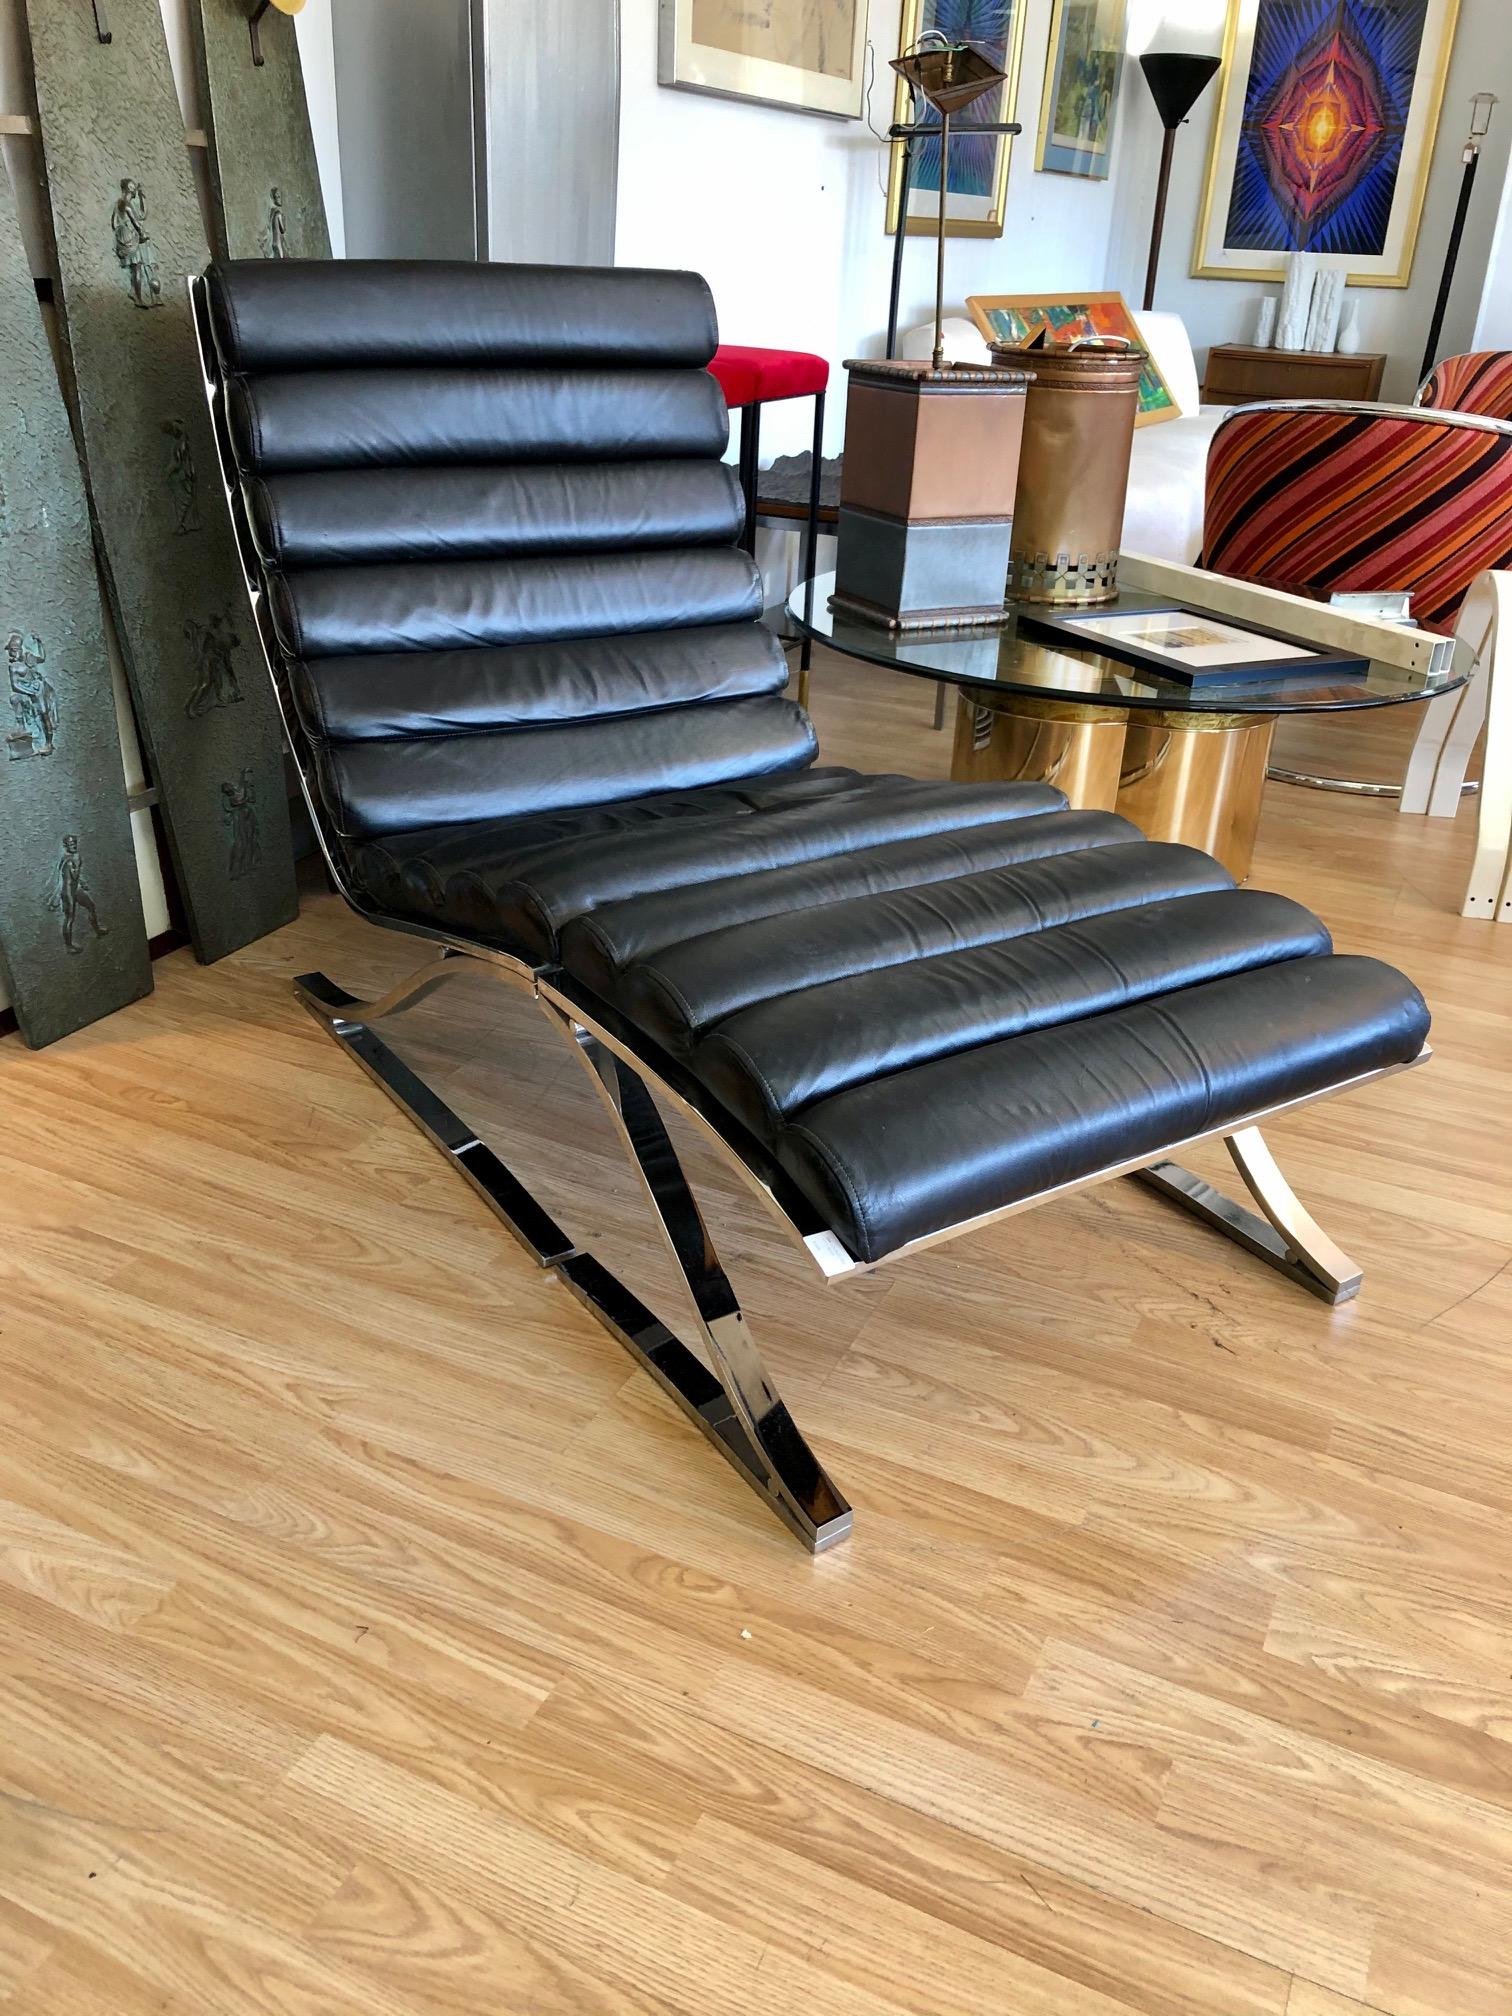 This vintage lounge chaise with ottoman is in overall good condition. Original black leather. Chrome frame. Cantilever. Designed by Design Institute America,
circa 1970s, USA.
Dimensions:
Lounge chaise:
35